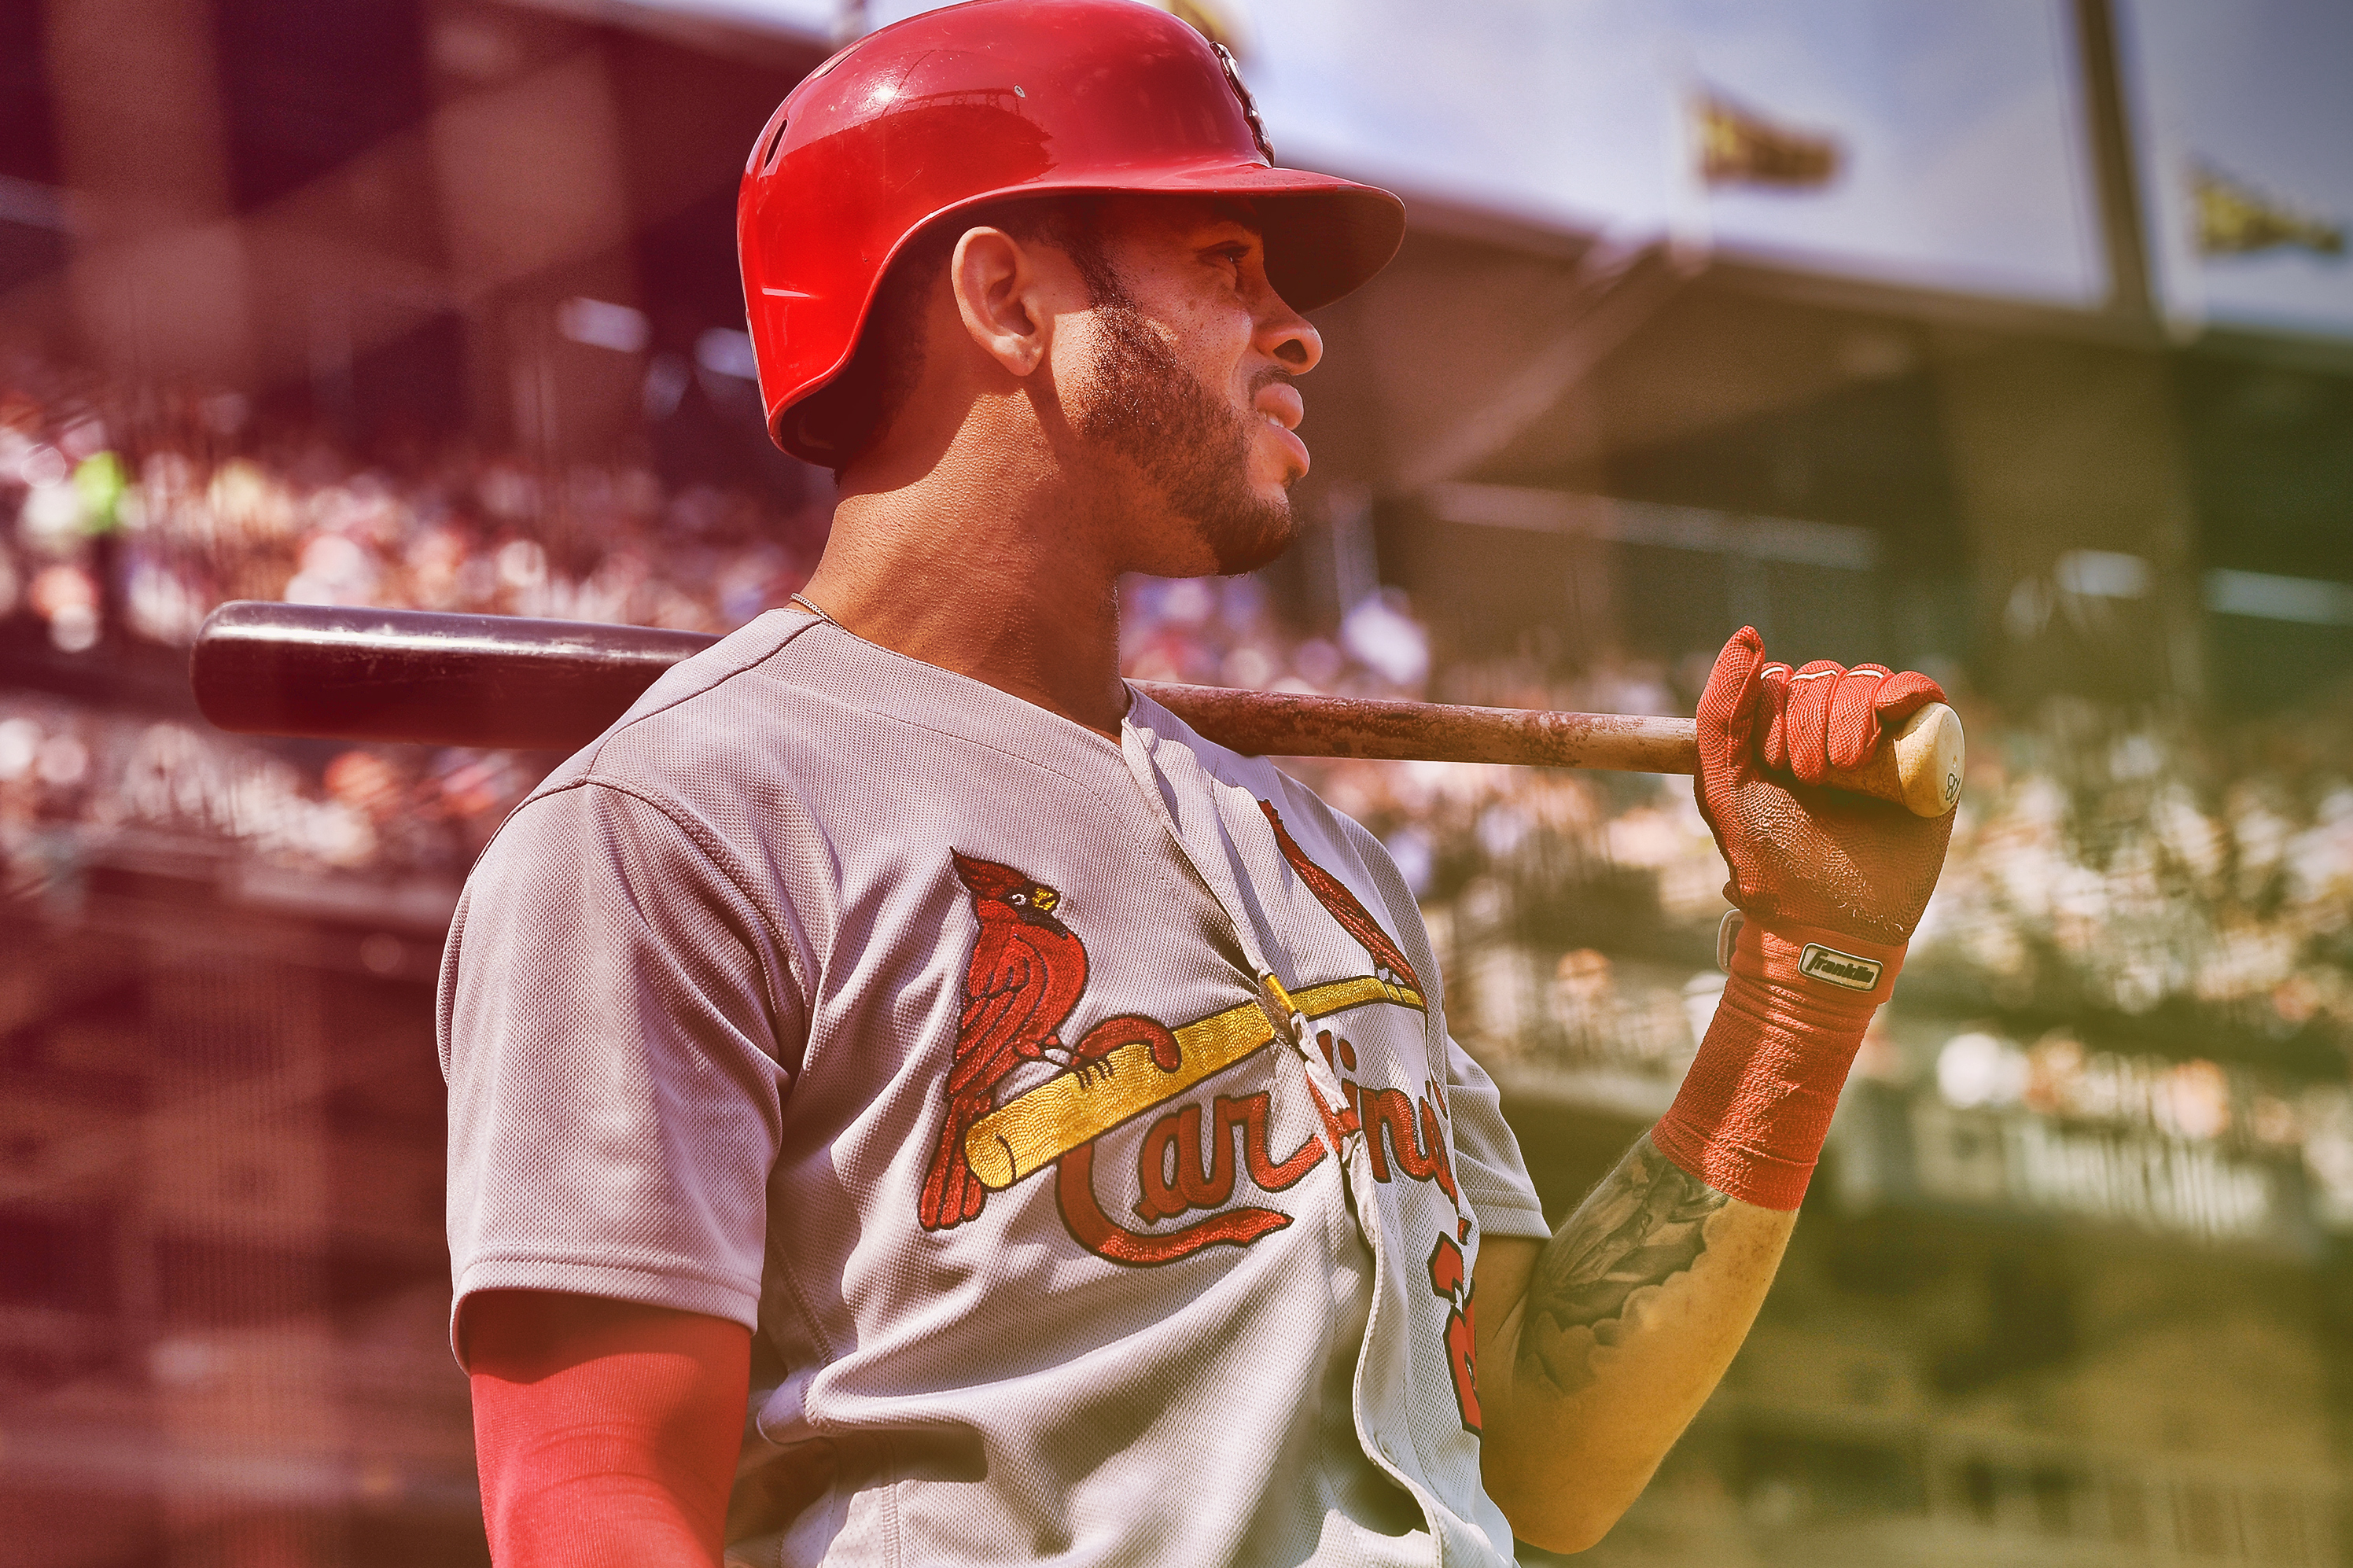 St. Louis Cardinals on X: The legend continues! Congratulations